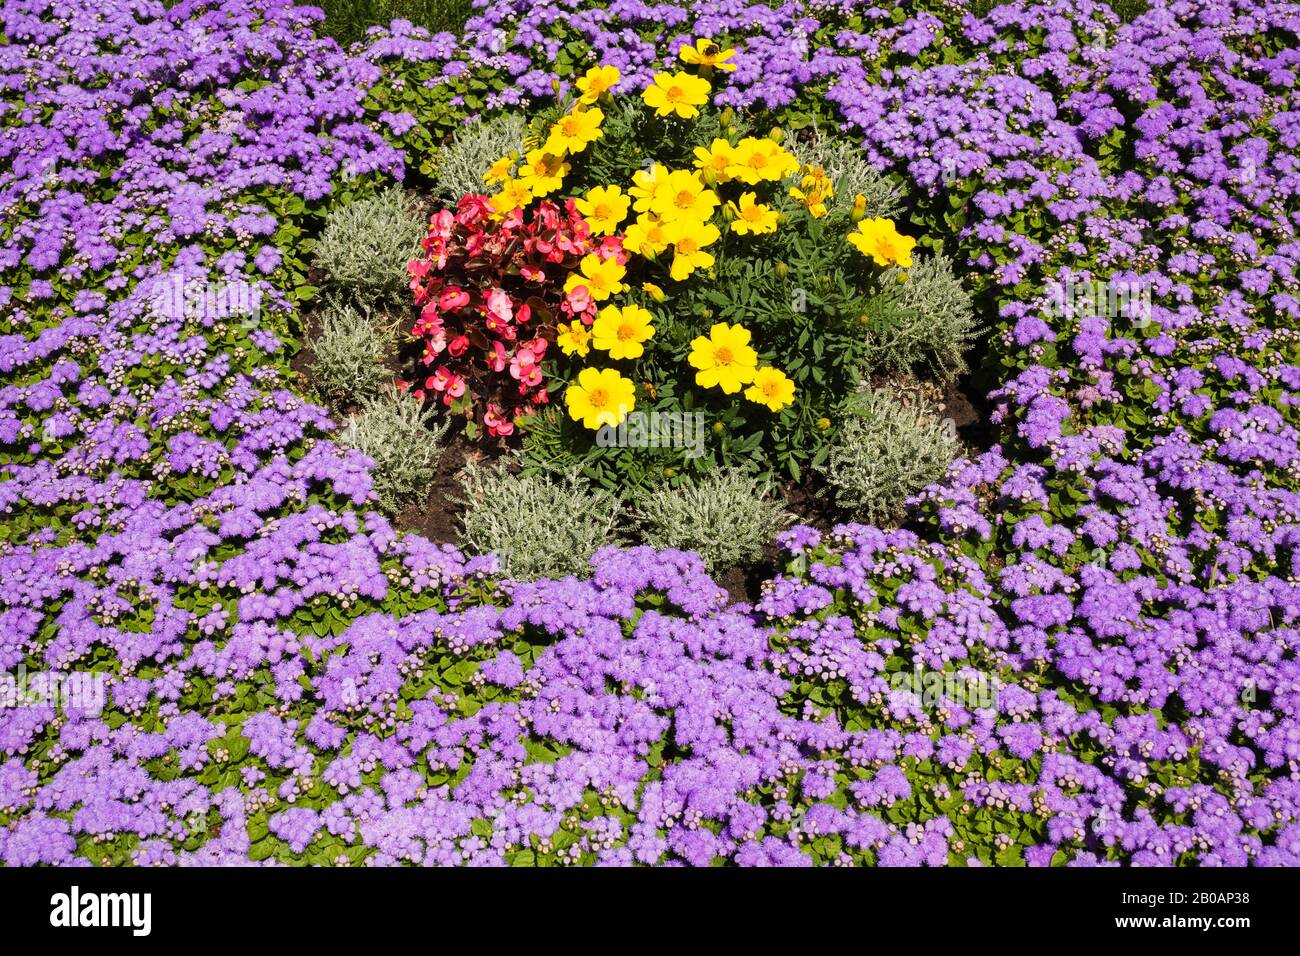 Blue Ageratum - Floss Flowers, yellow Tagetes - Marigold, red Begonia flowers in border in exhibition garden in summer, Montreal Botanical Garden Stock Photo